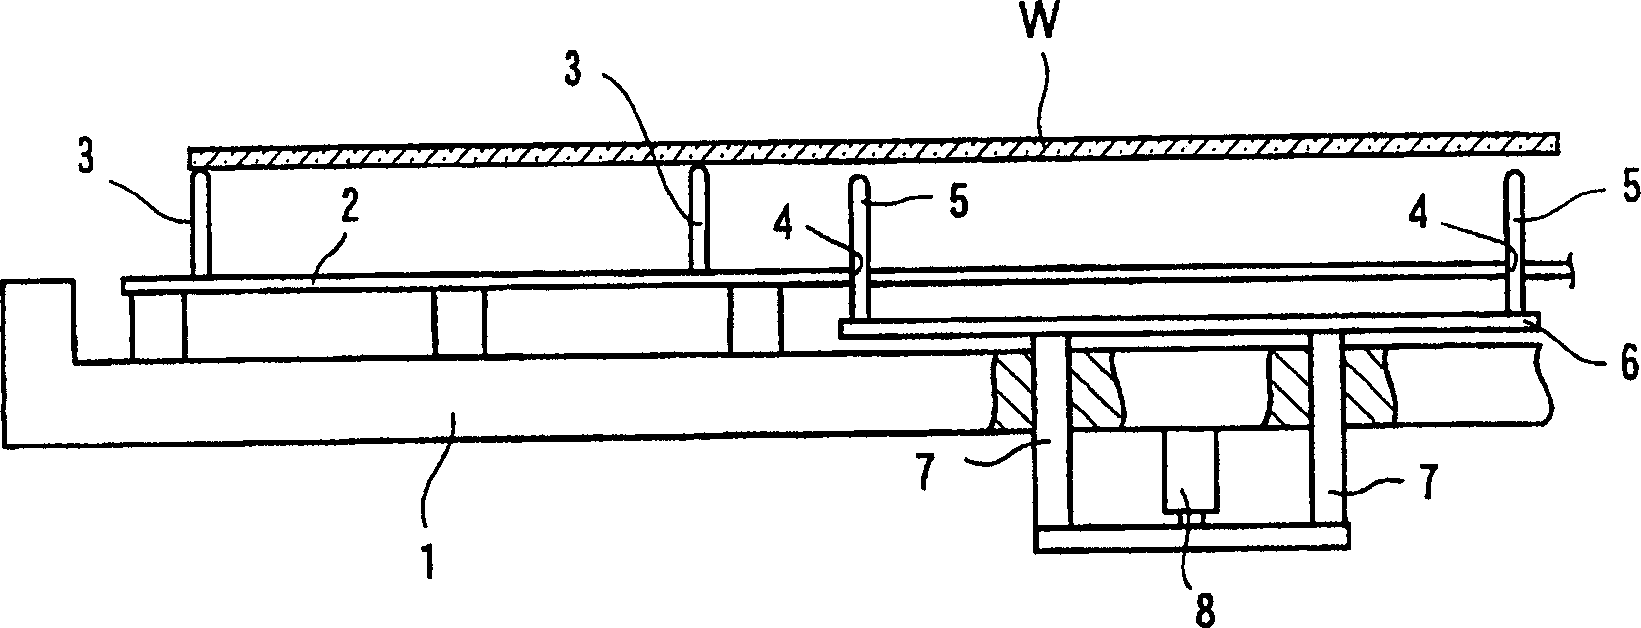 Substrate placing stage